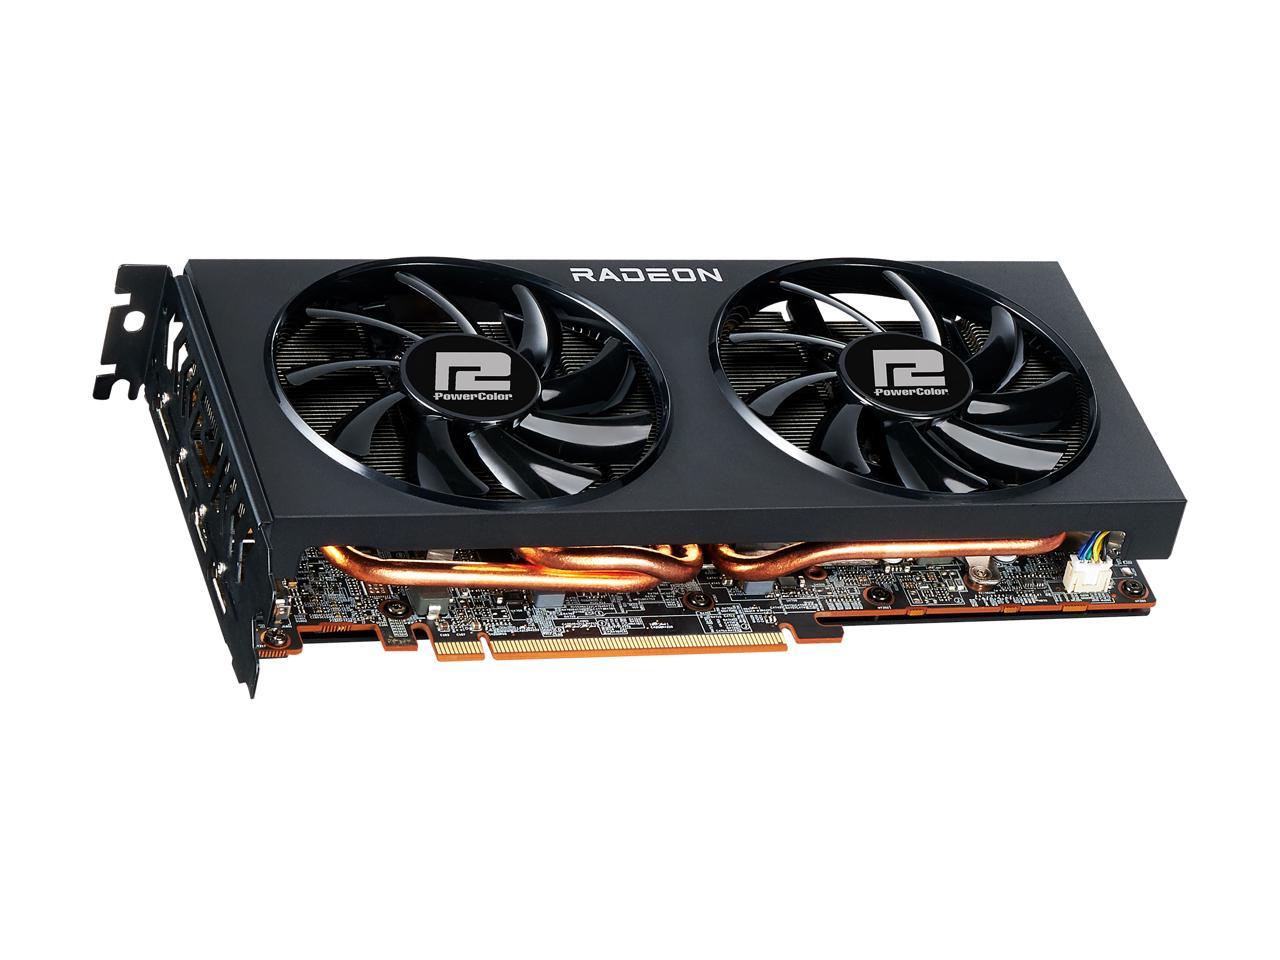 PowerColor Fighter AMD Radeon RX 6700 XT Gaming Graphics